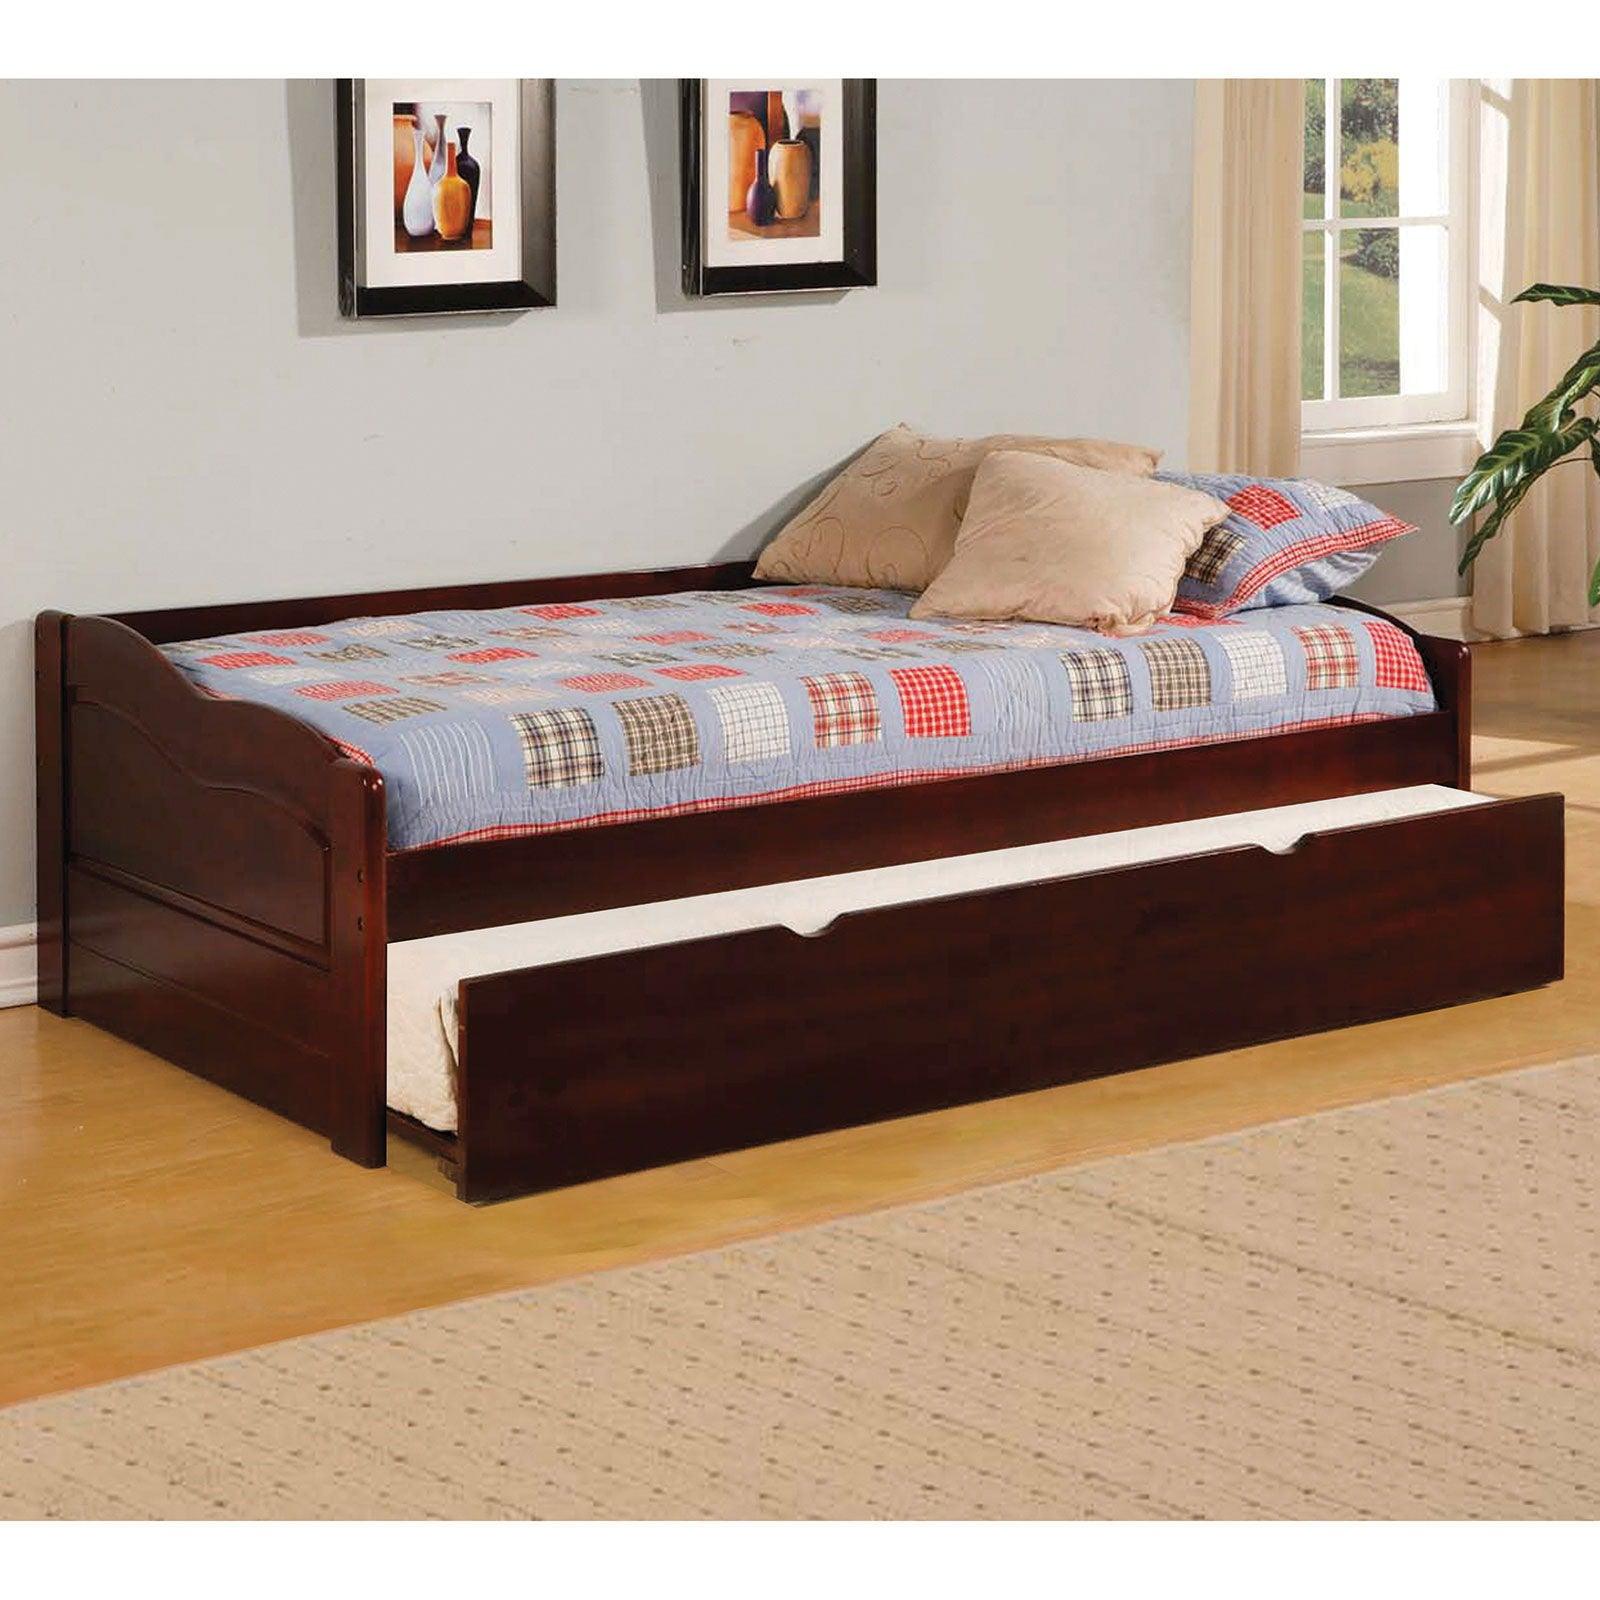 Sunset - Daybed With Trundle - Cherry